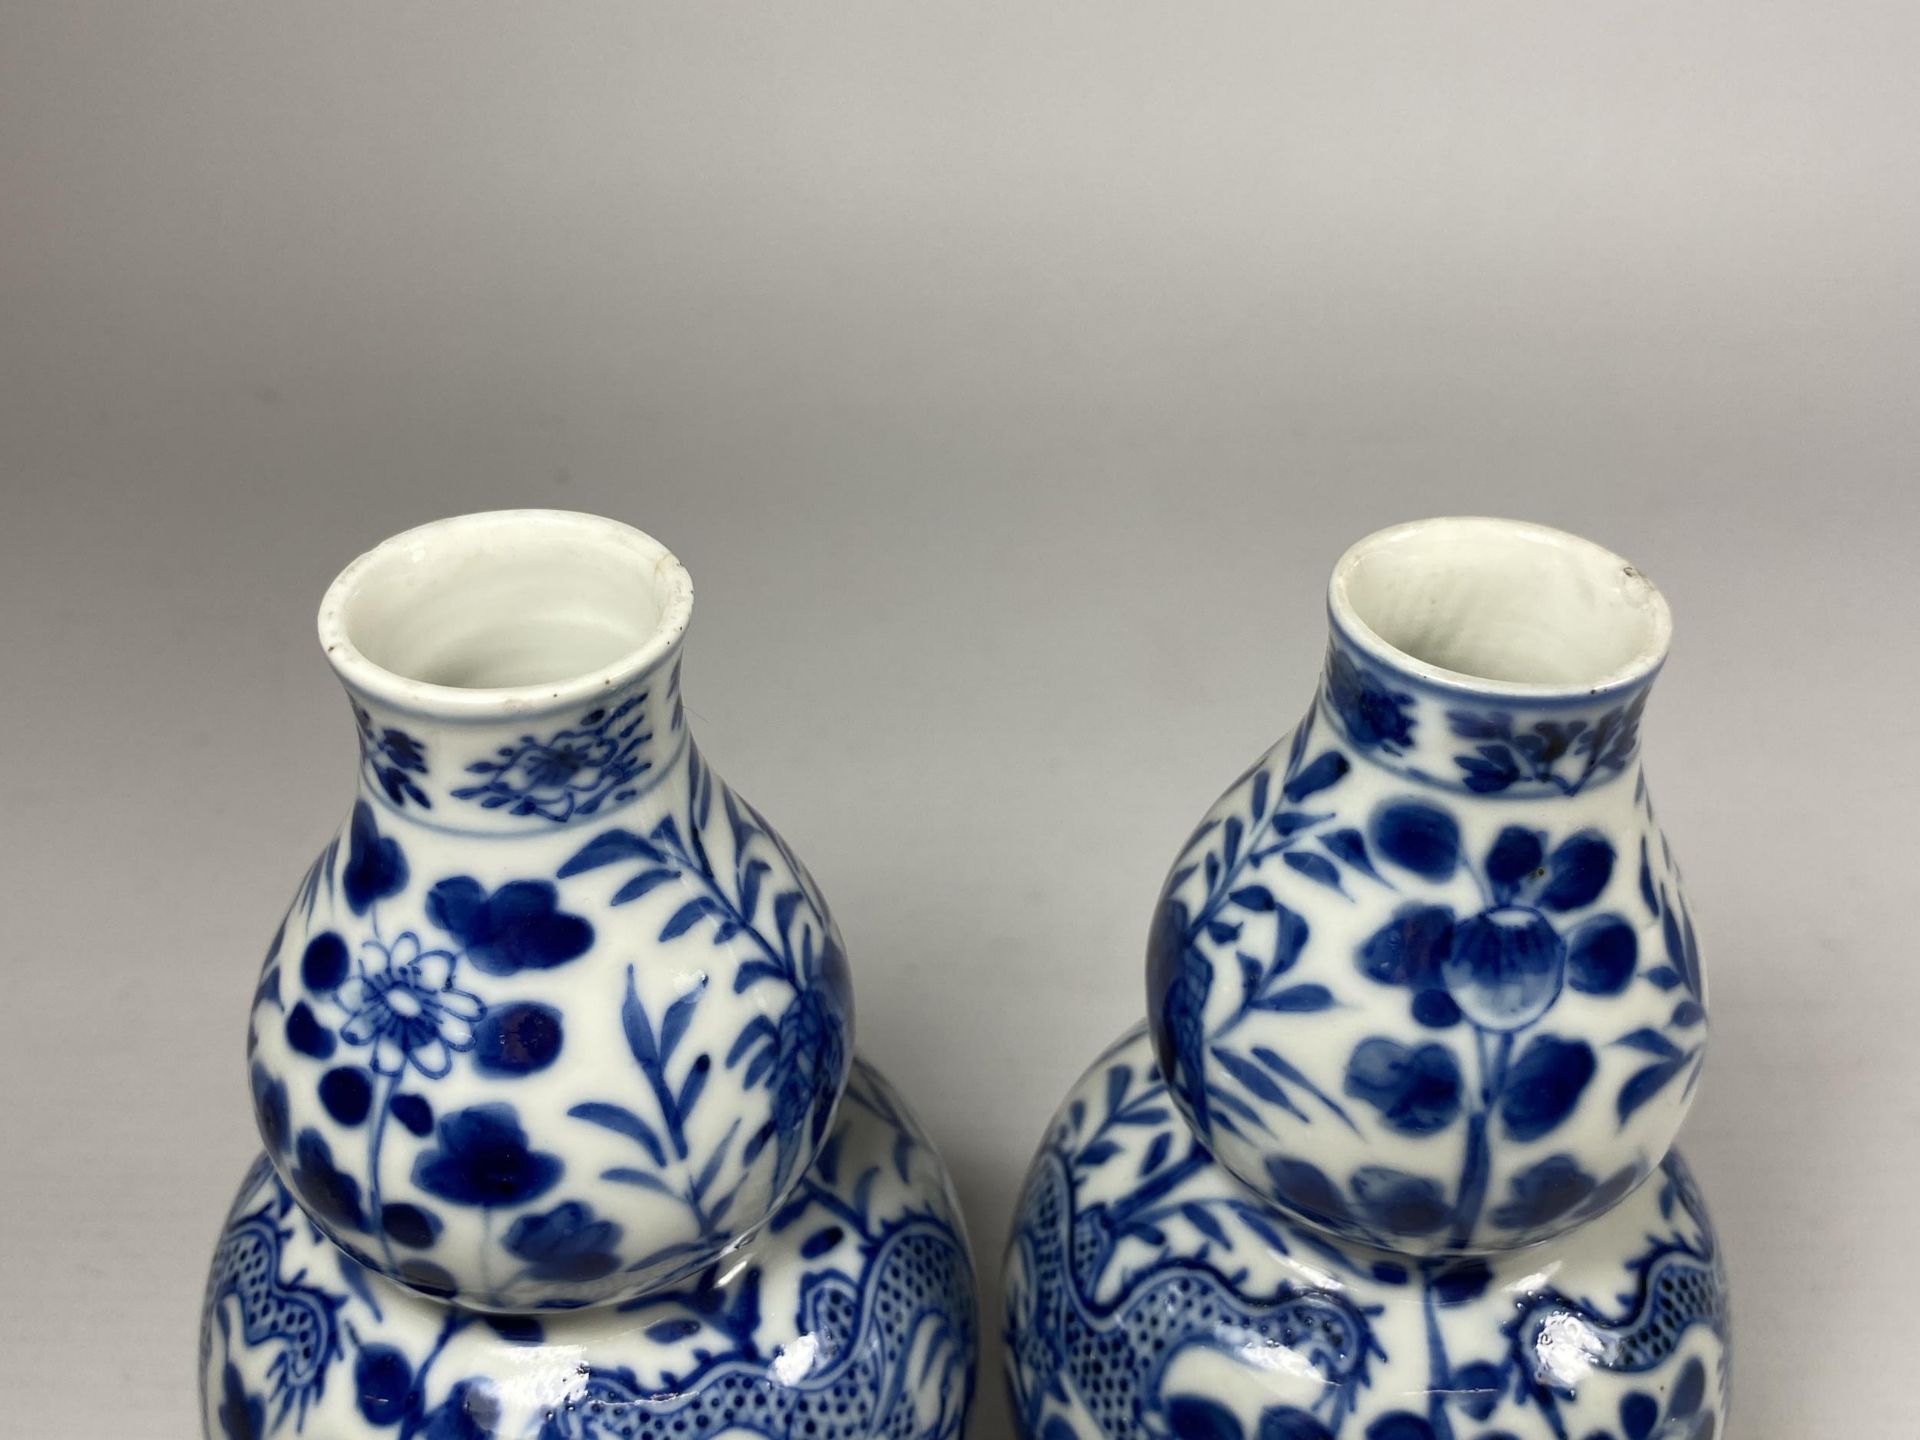 A PAIR OF QING 19TH CENTURY CHINESE BLUE AND WHITE KANGXI STYLE DOUBLE GOURD VASES, FOUR CHARACTER - Image 6 of 9